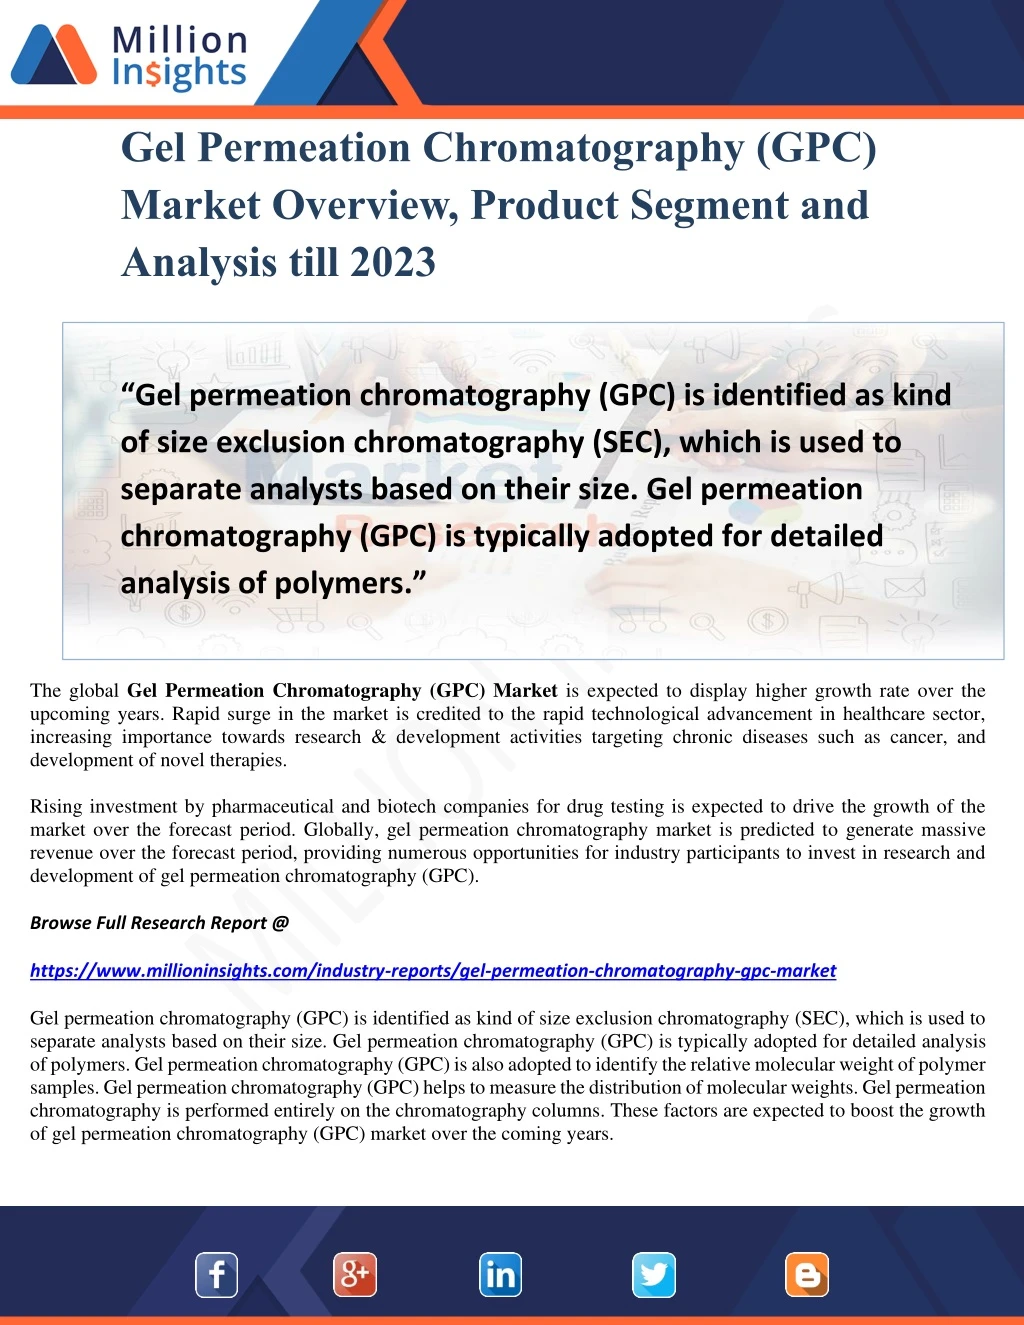 gel permeation chromatography gpc market overview